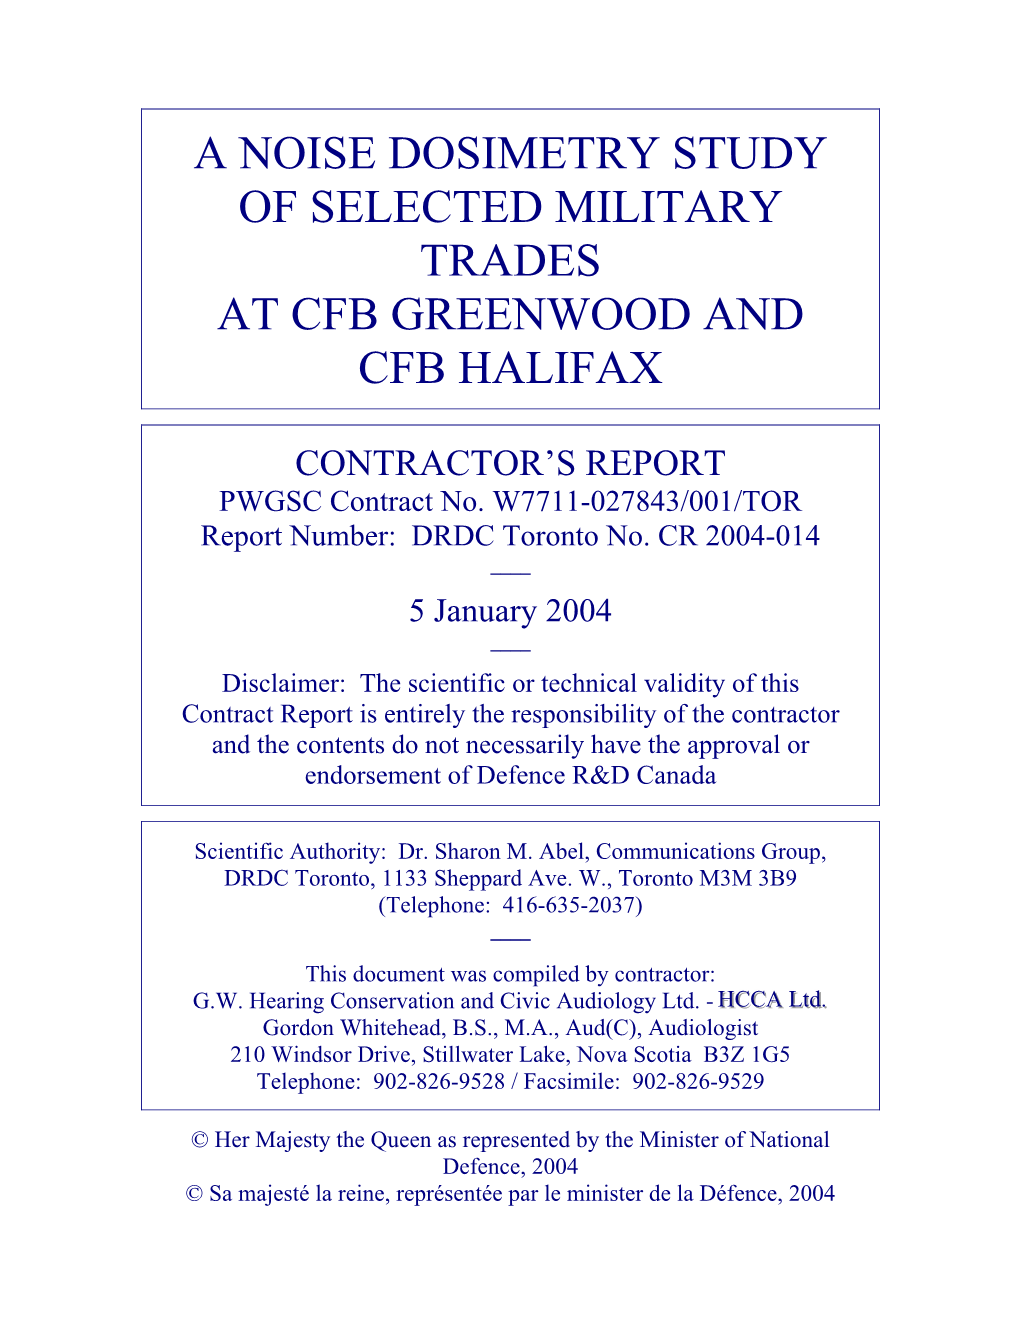 A Noise Dosimetry Study of Selected Military Trades at Cfb Greenwood and Cfb Halifax